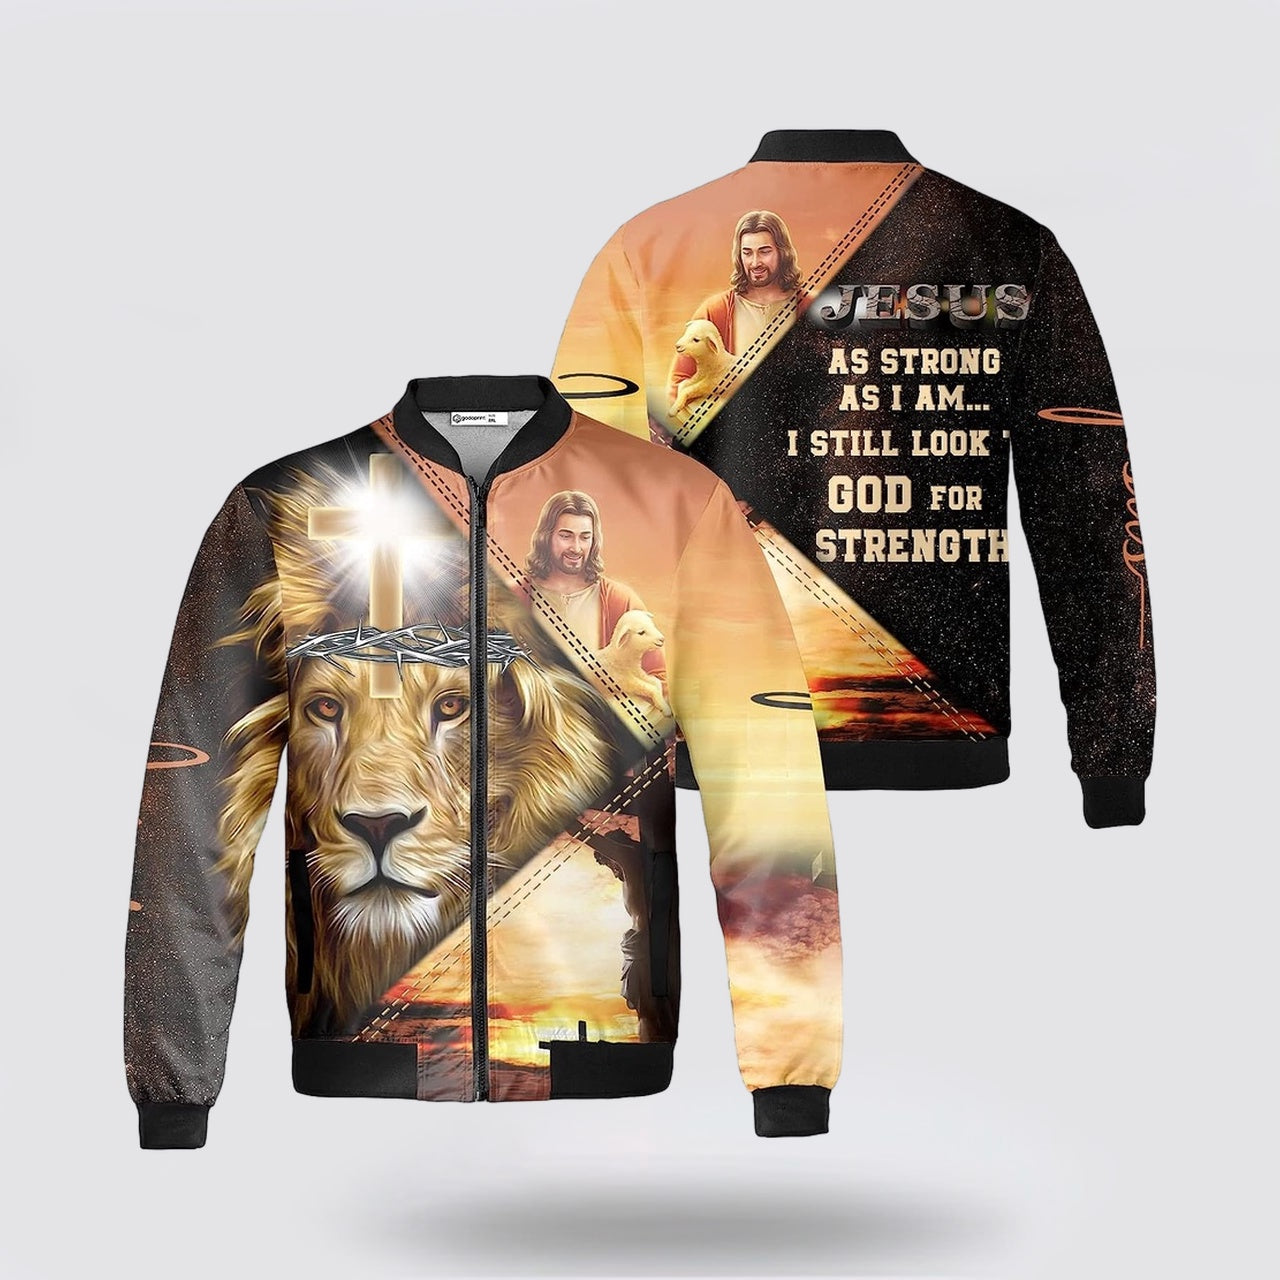 The Lion Cross Jesus As Strong As I Am Bomber Jacket - Christian Bomber Shirts for Men and Women